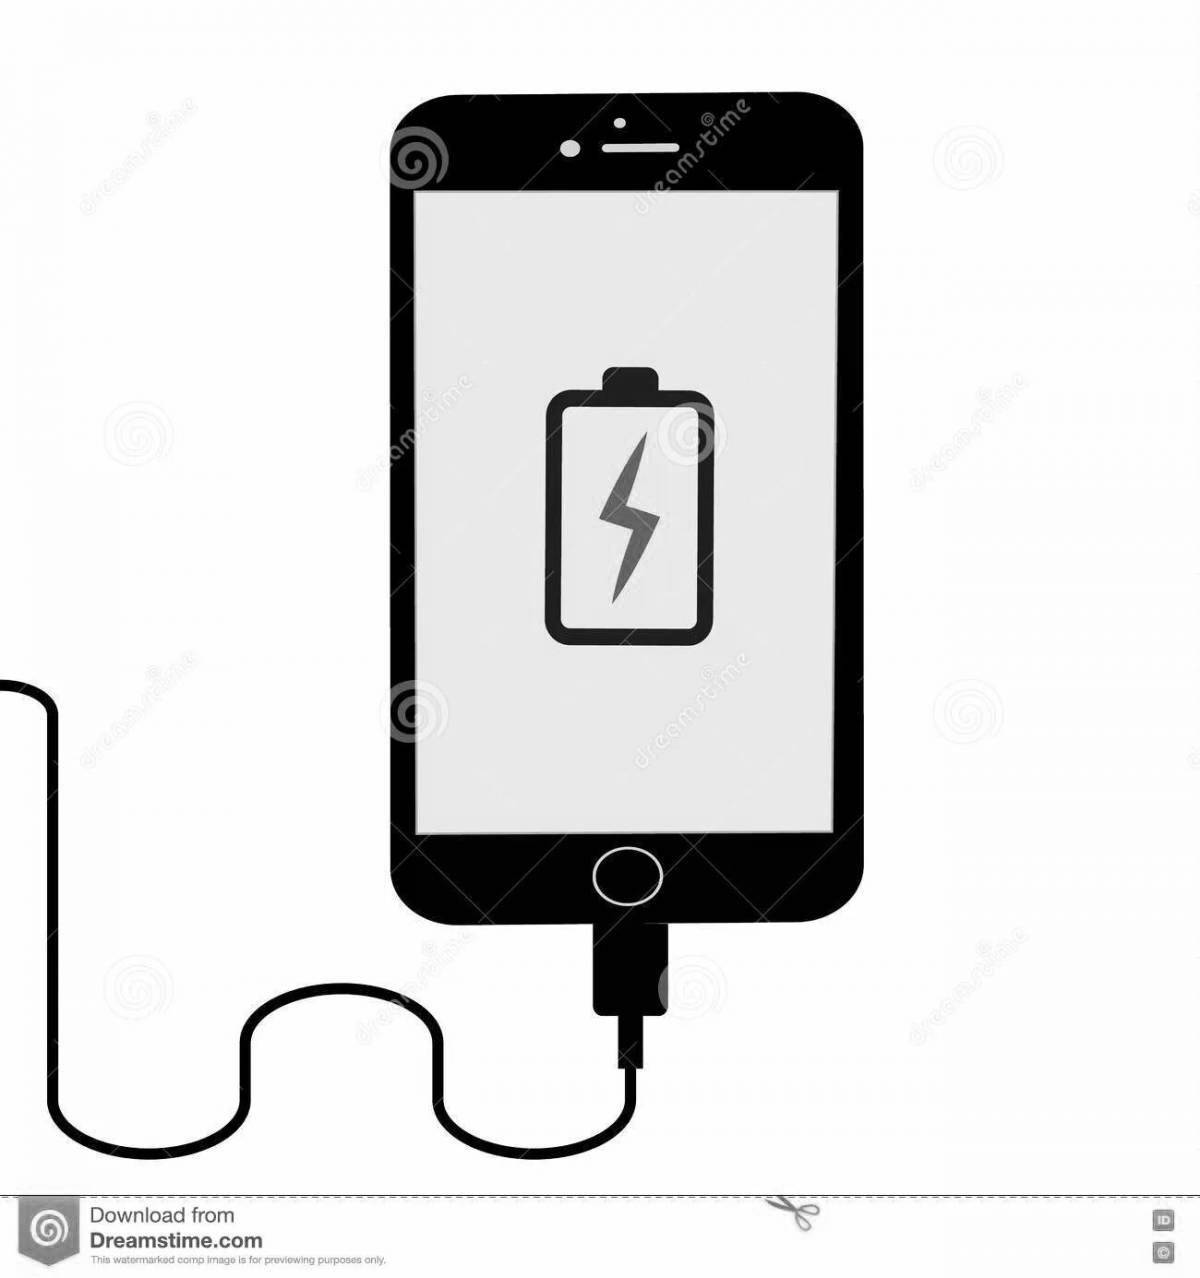 Fabulous phone charger coloring page